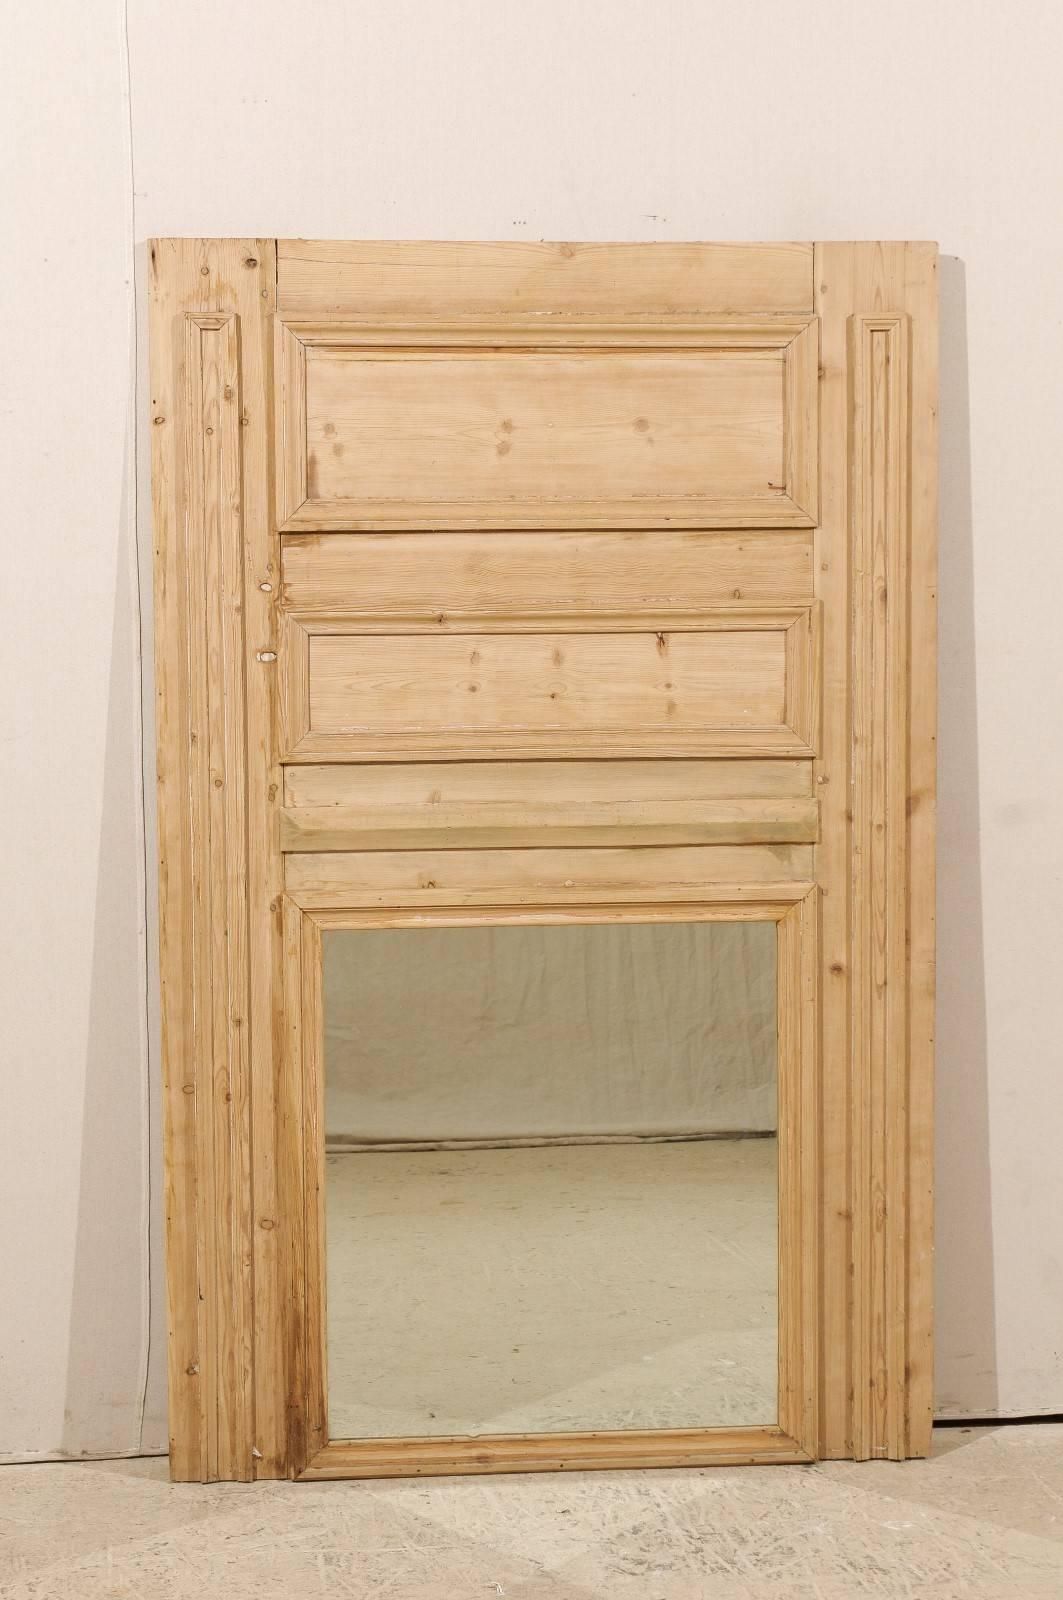 A French 19th century wood trumeau mirror. This French piece features its original glass. The surround is made of original natural pine wood. Nice wood grain is present throughout. This trumeau mirror has two decorative upper horizontal rectangular